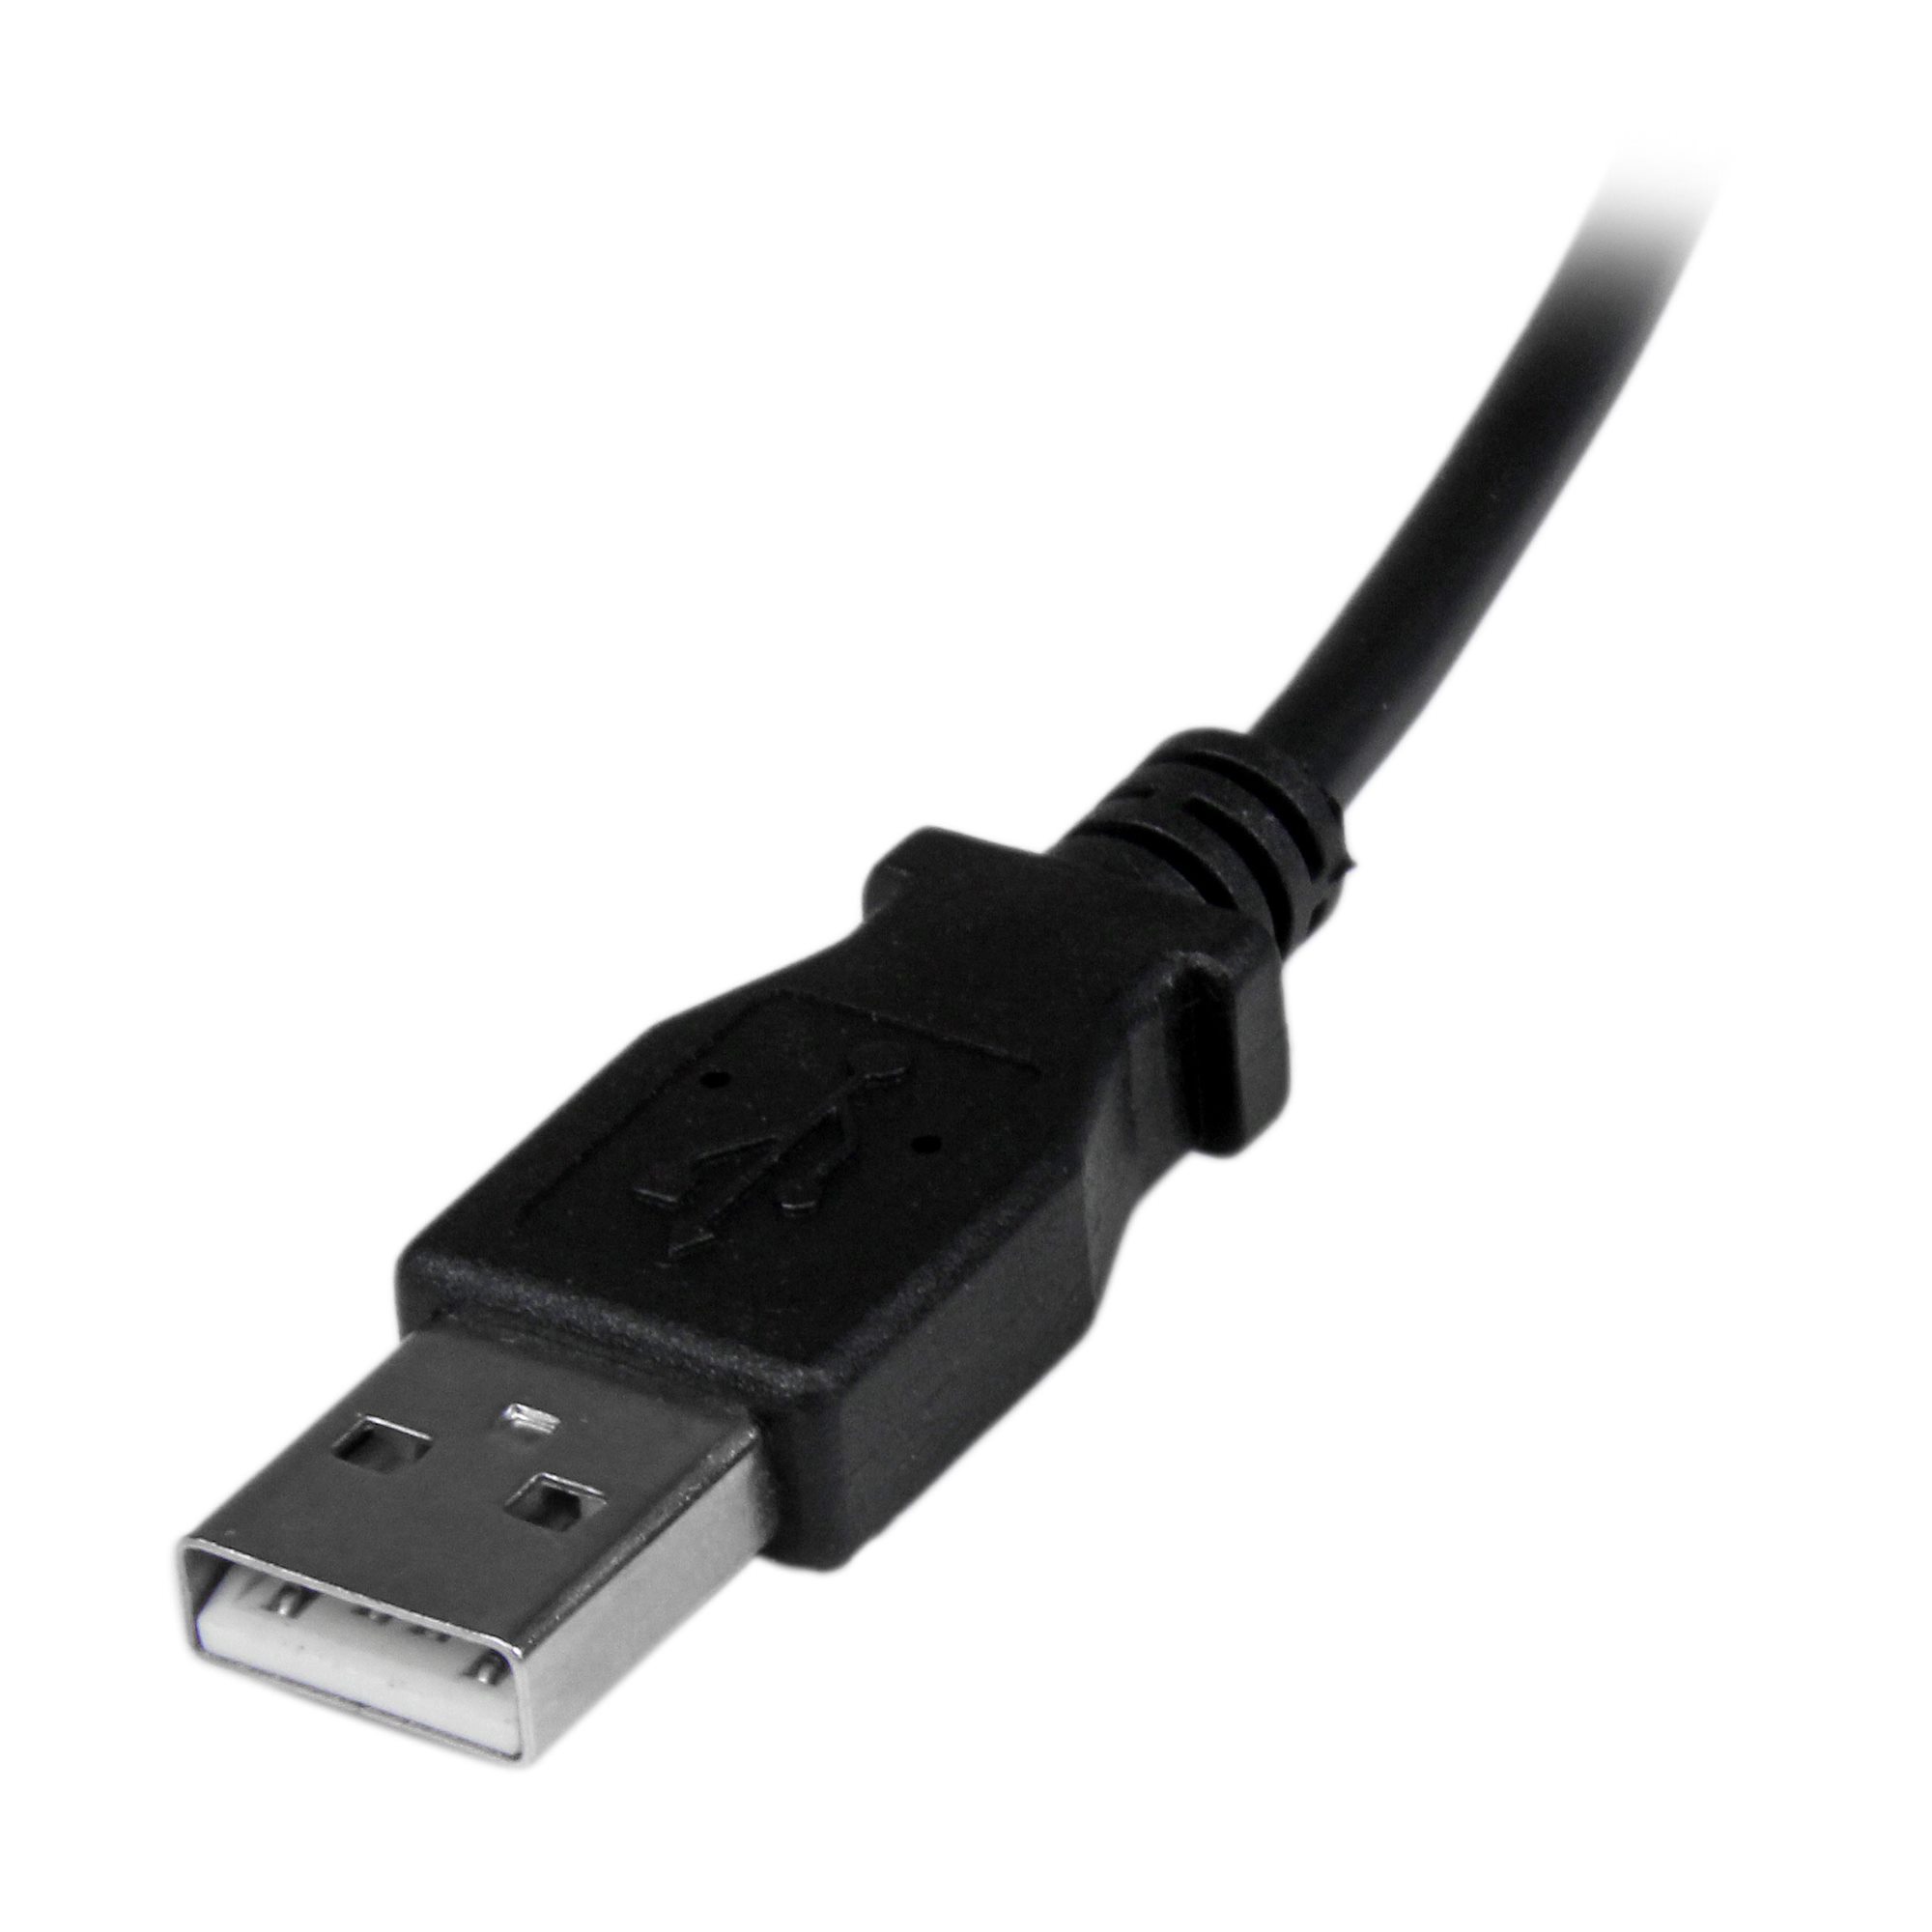 Slim Micro USB 3.0 (5Gbps) Cable - M/M - 15cm (6in)